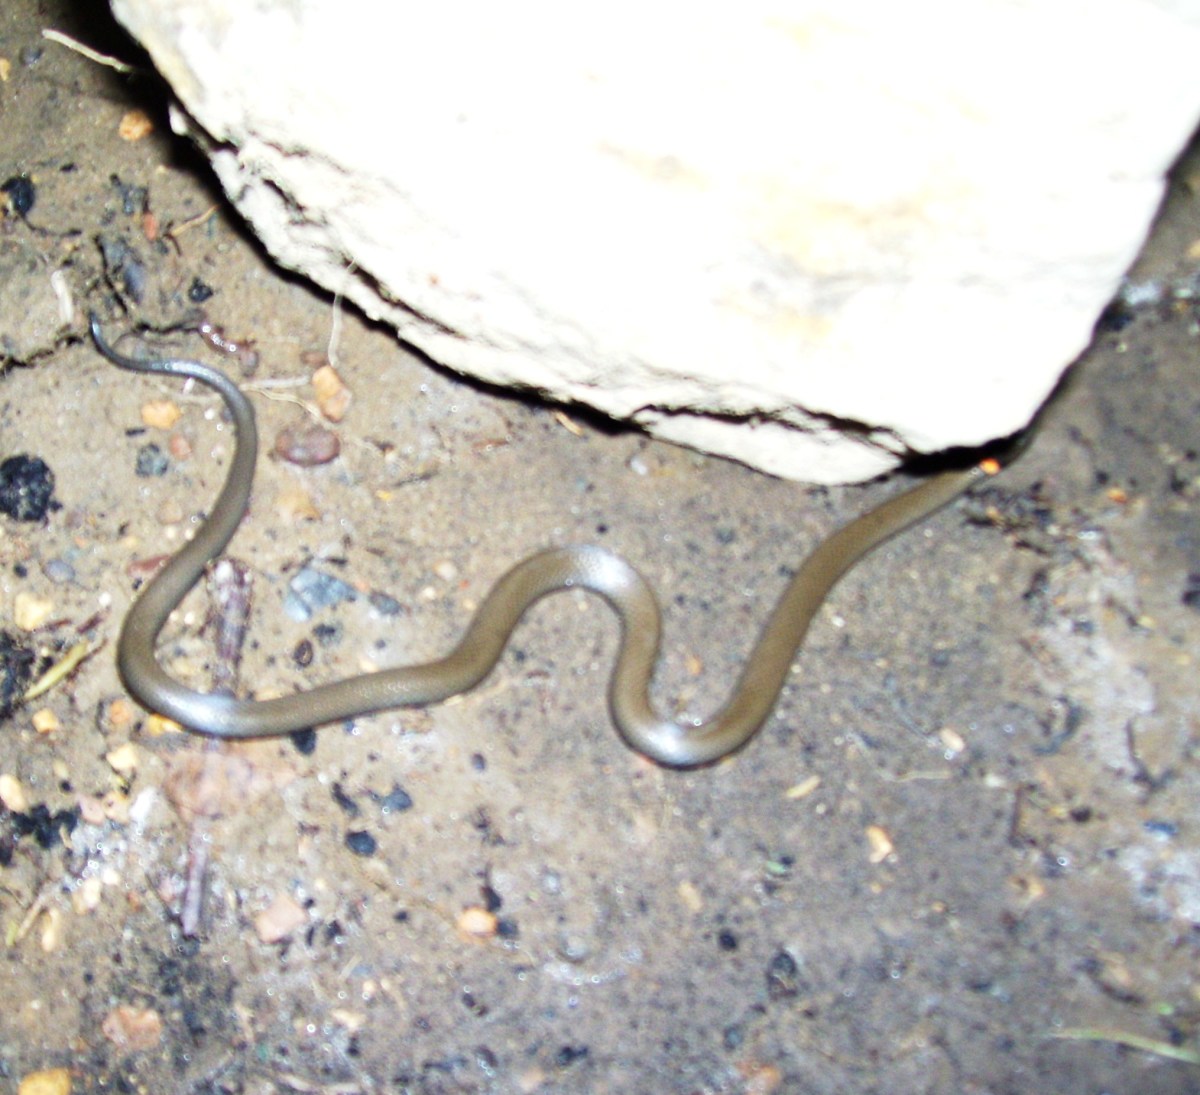 Another ringneck snake found under a stone.